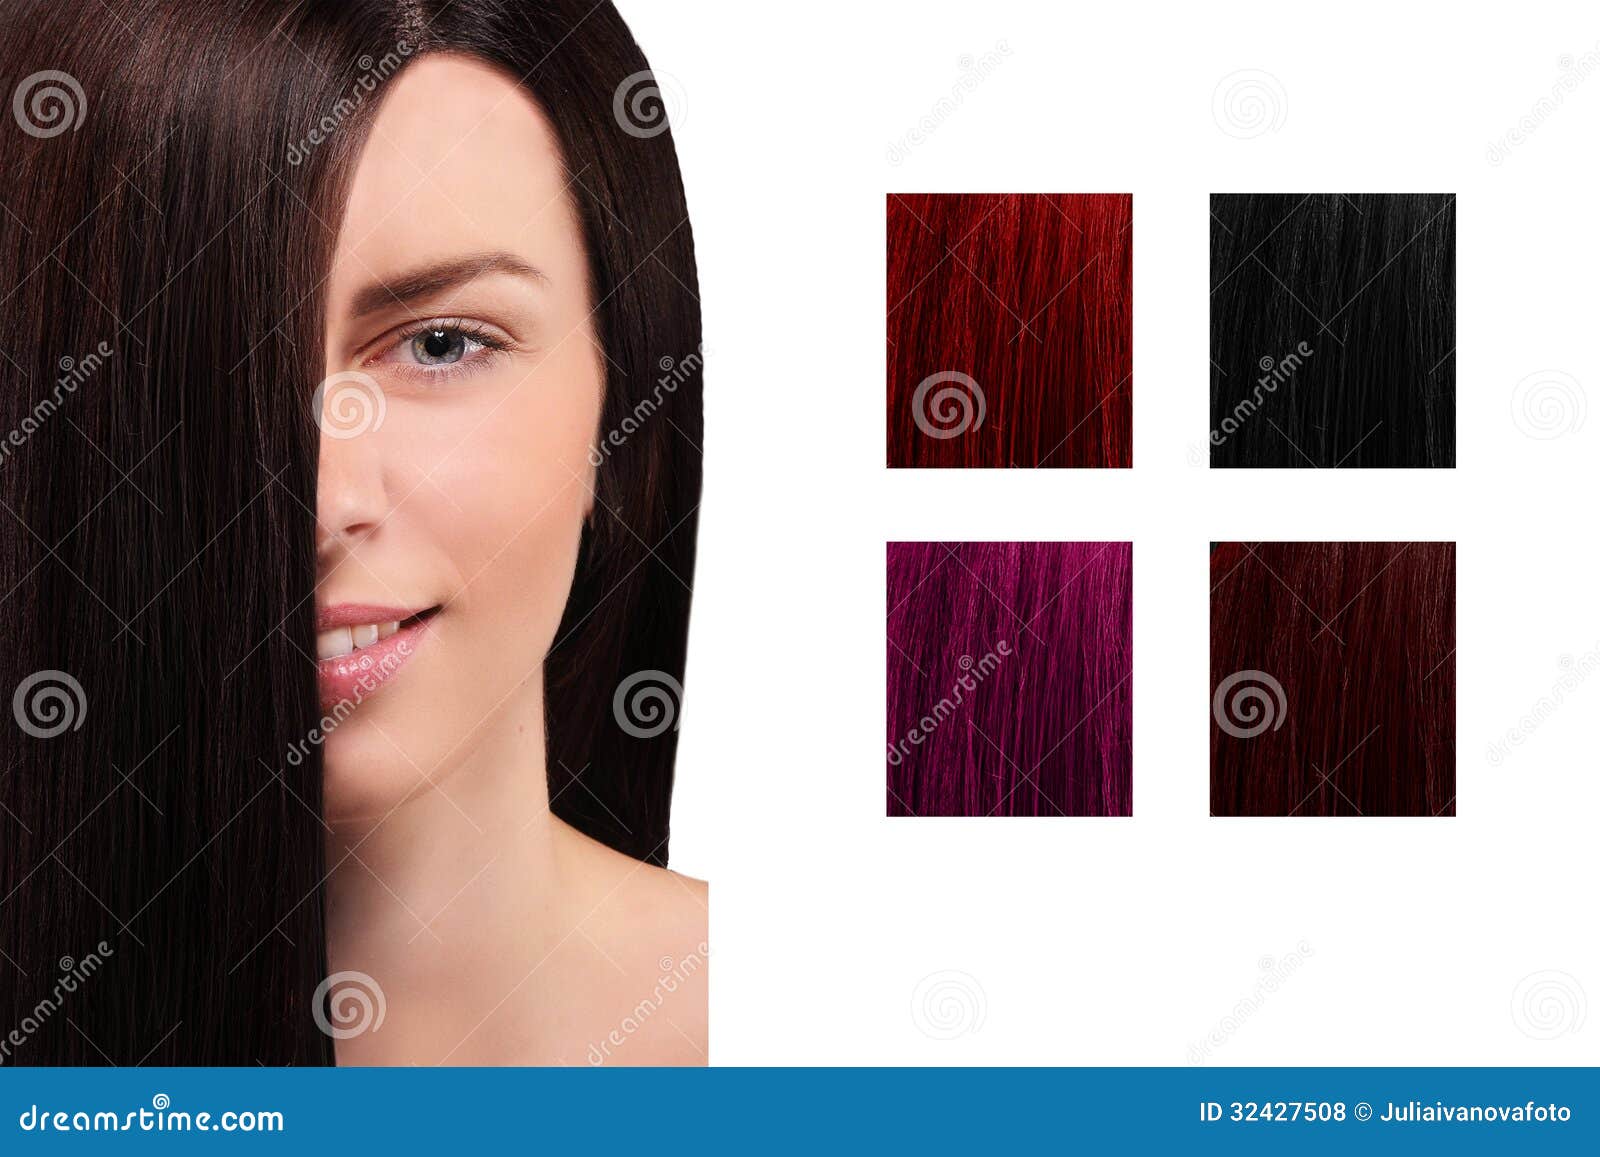 Hair Color Table with a Smiling Girl Stock Photo - Image of portrait,  brunette: 32427508